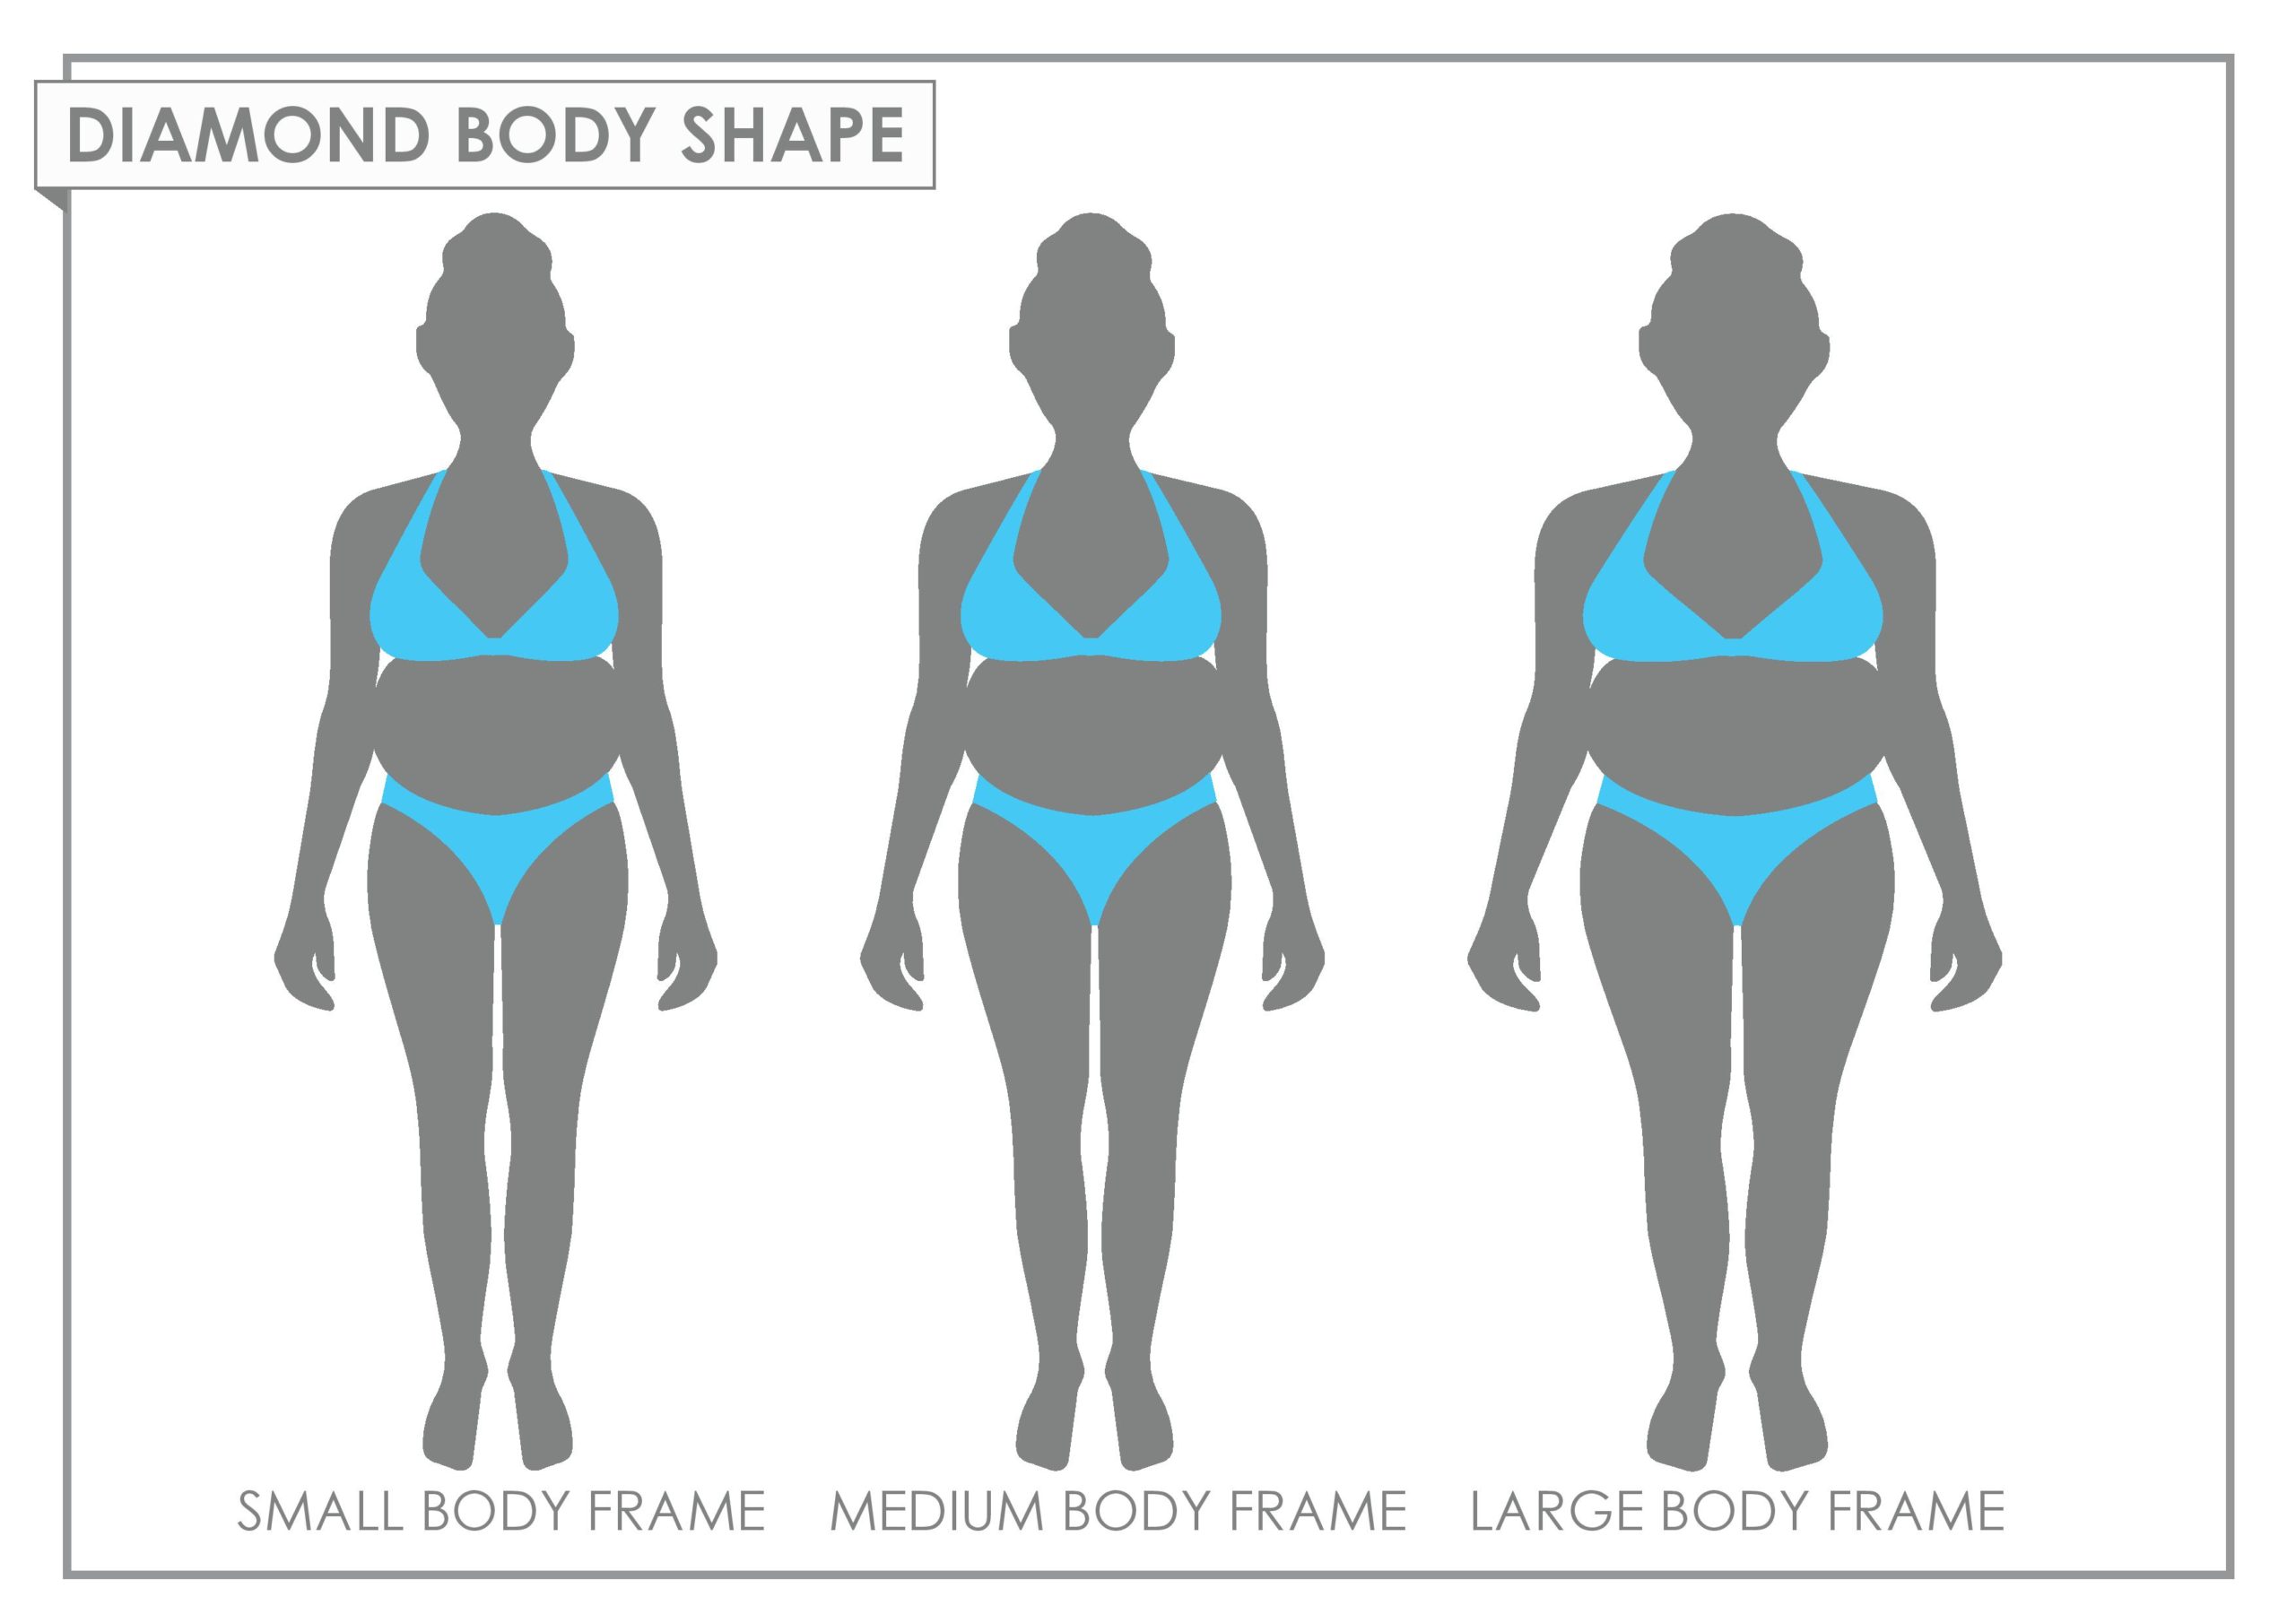 Body Shape Flattery - Image Consultant & Personal Stylist